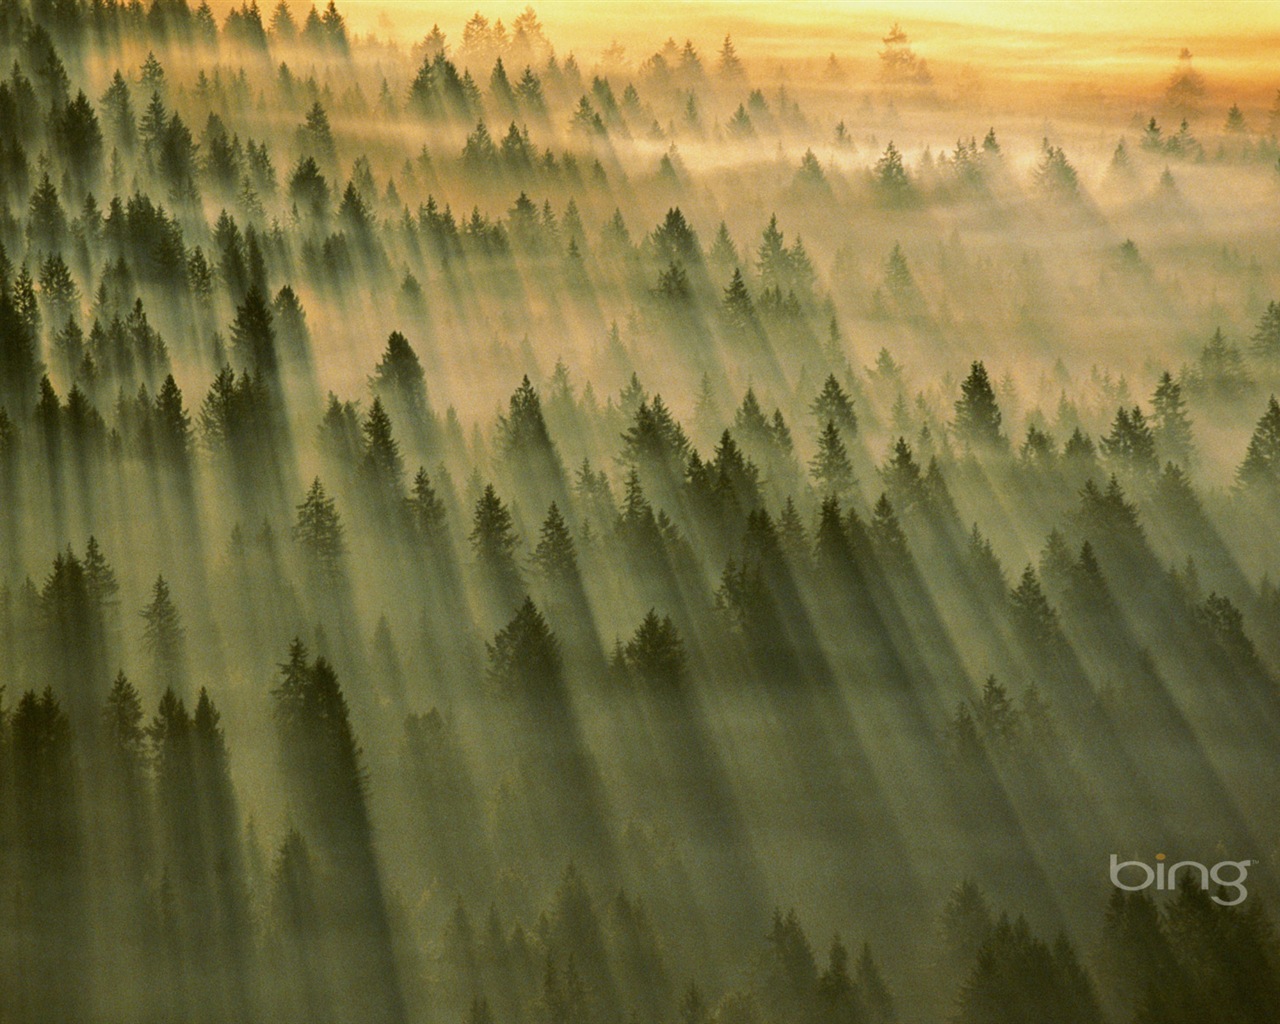 2013 Bing official theme HD wallpapers #26 - 1280x1024